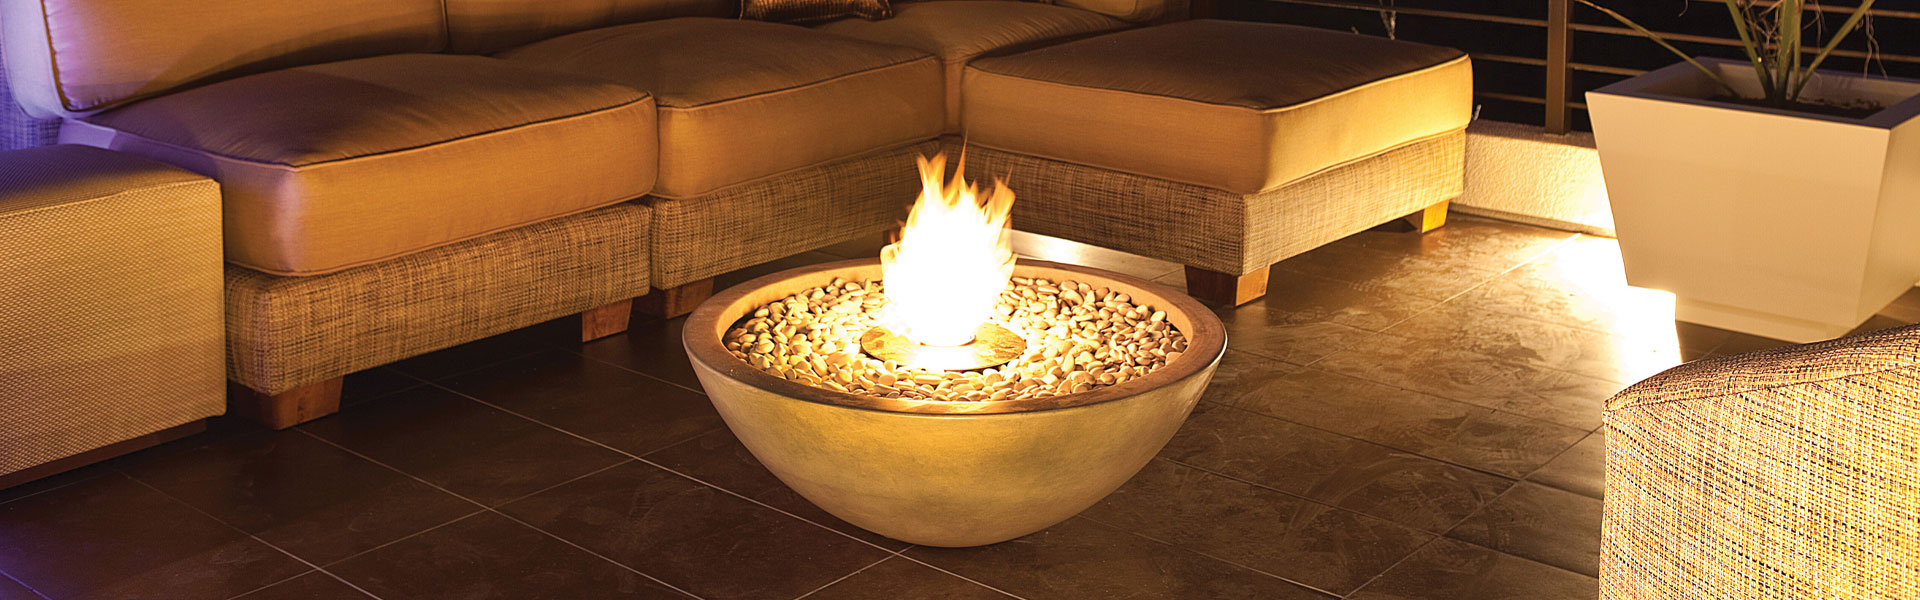 firepits are one of the biggest home improvements trends of 2021